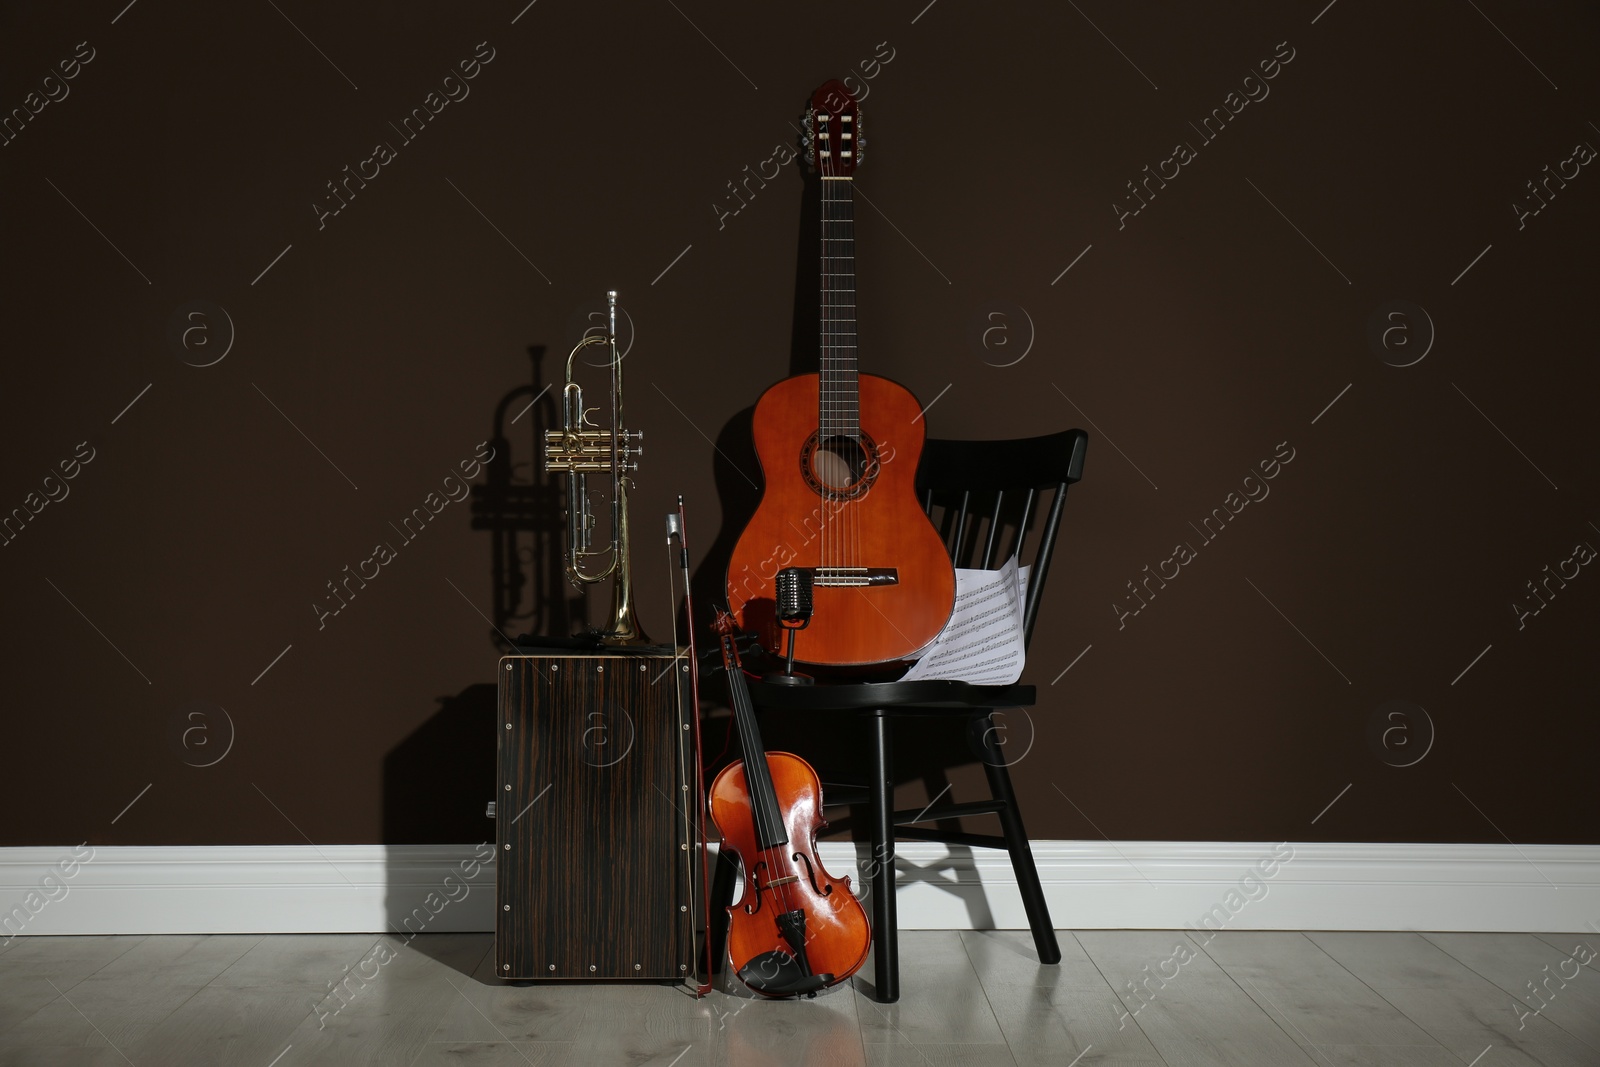 Photo of Set of different musical instruments near brown wall indoors